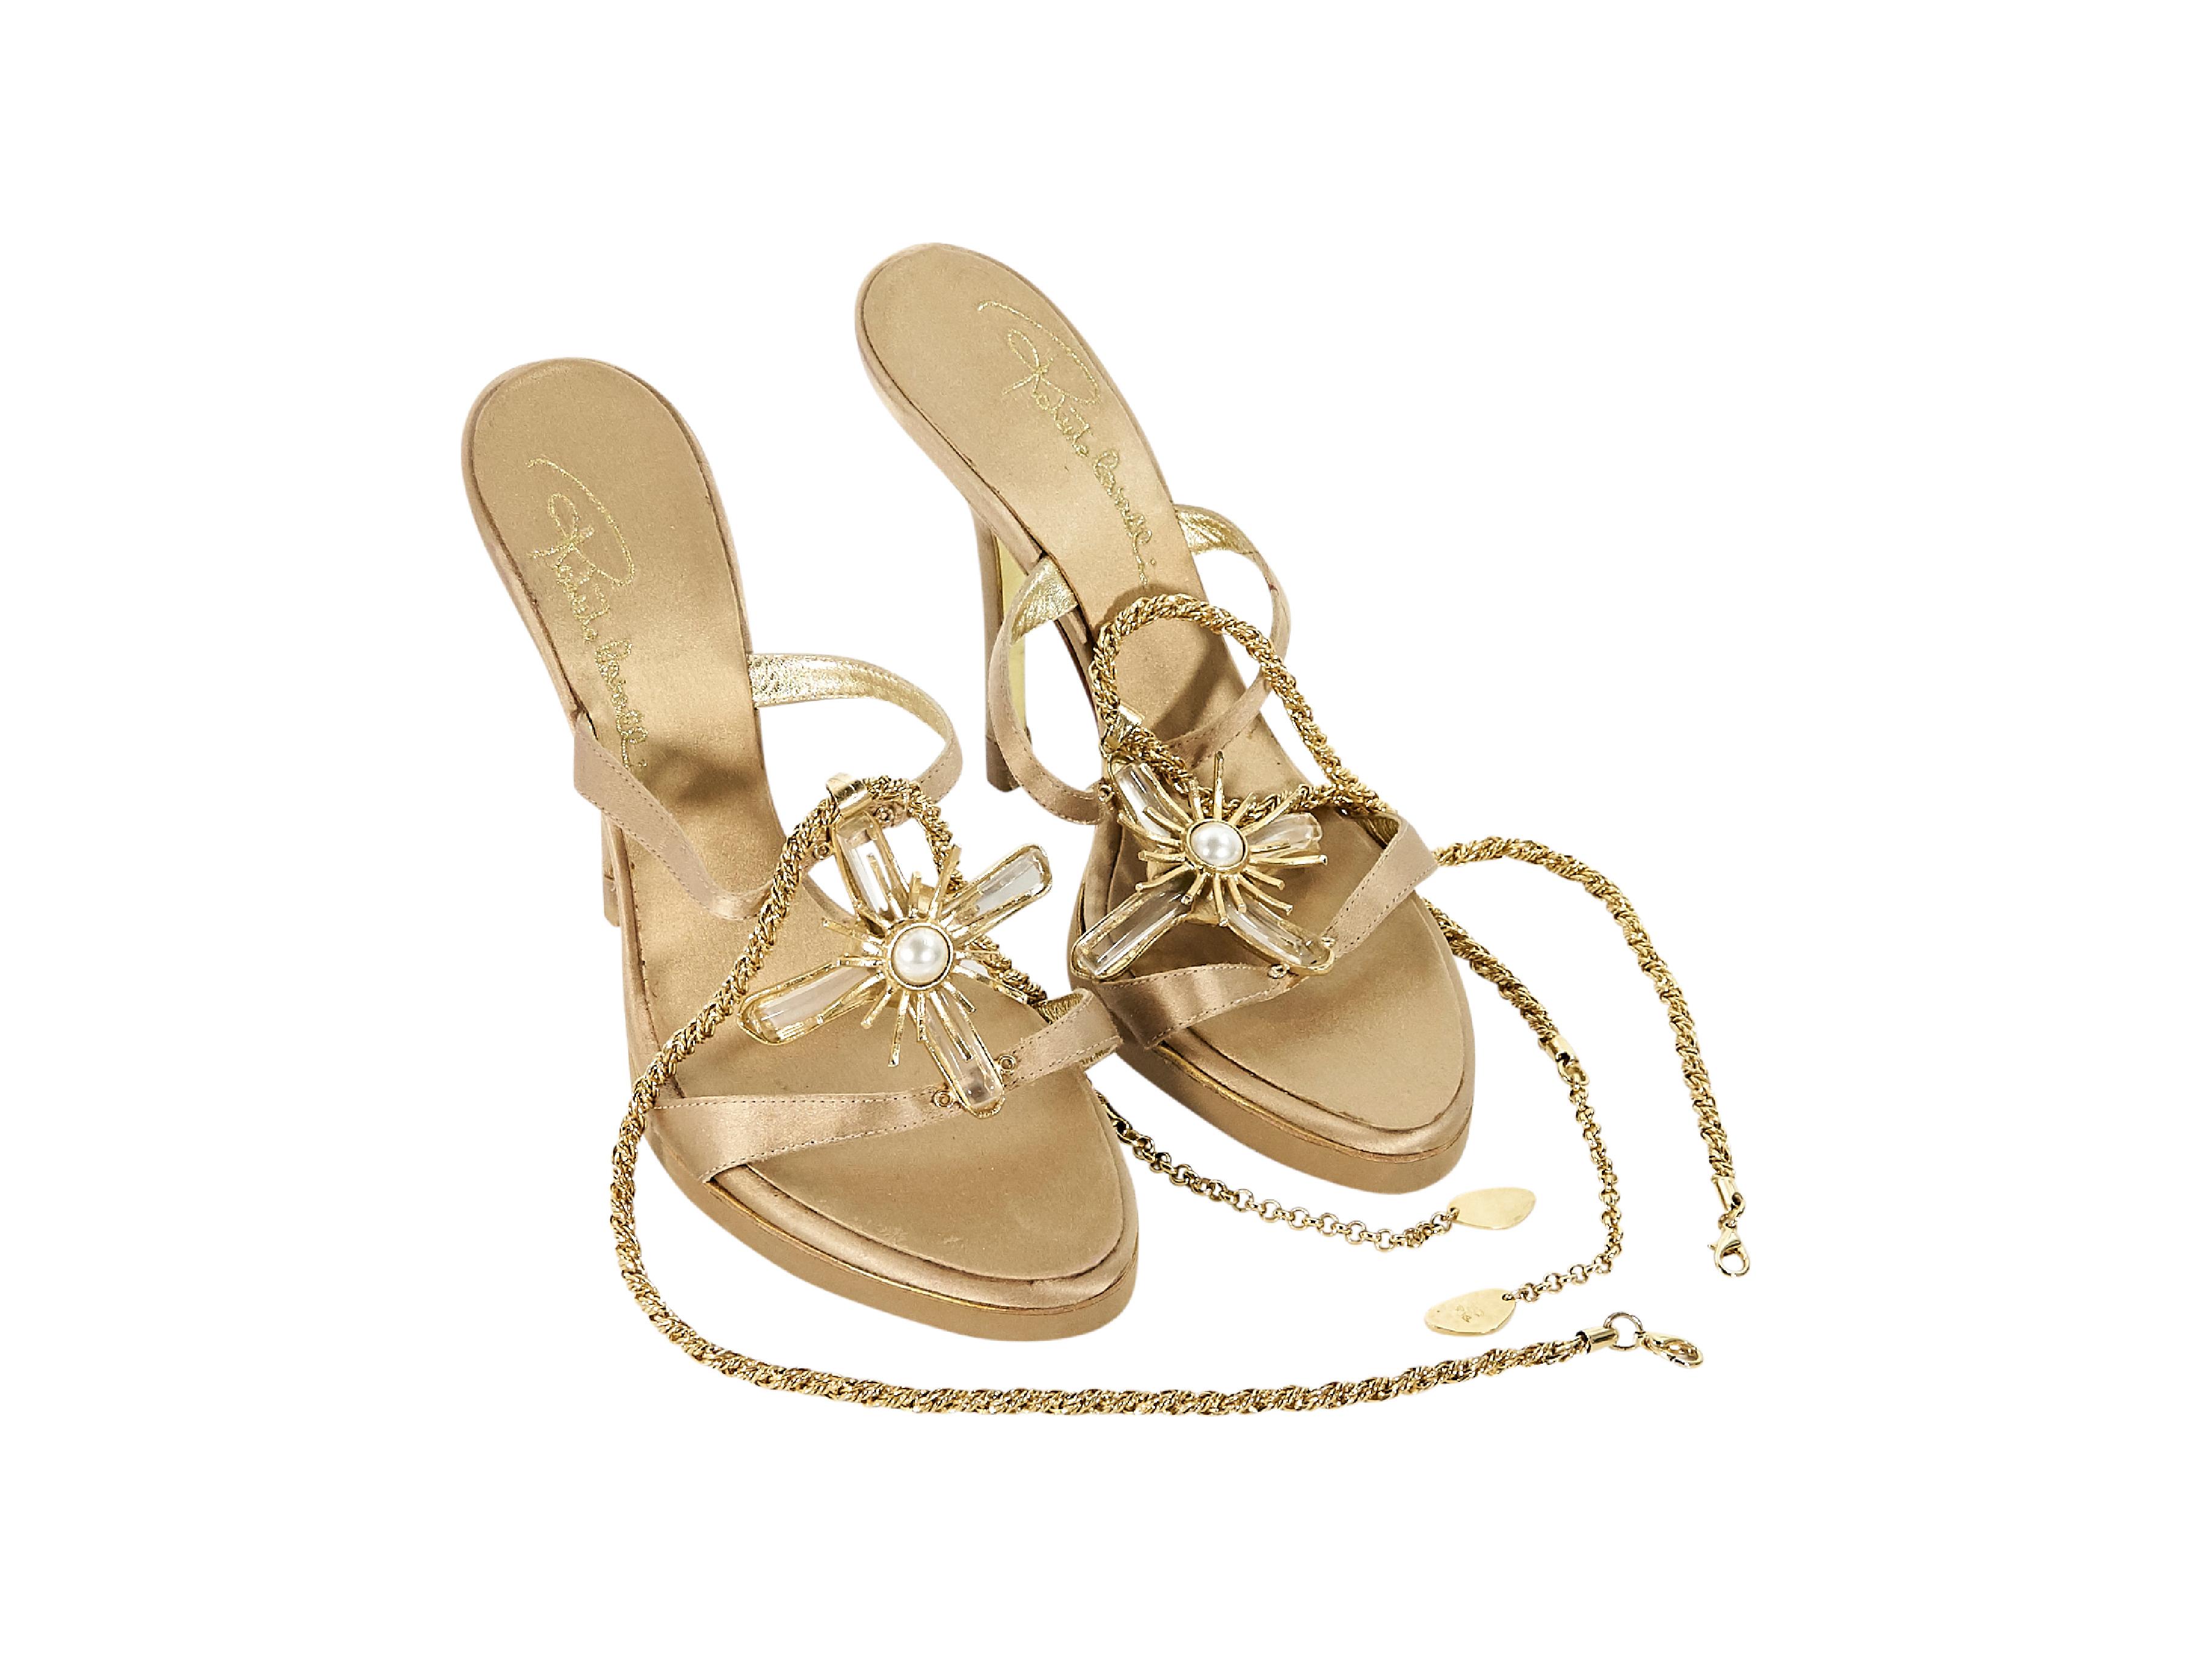 Product details:  Metallic gold satin strappy sandals by Roberto Cavalli.  Embellished instep.  Chain ankle straps.  Open toe.  4